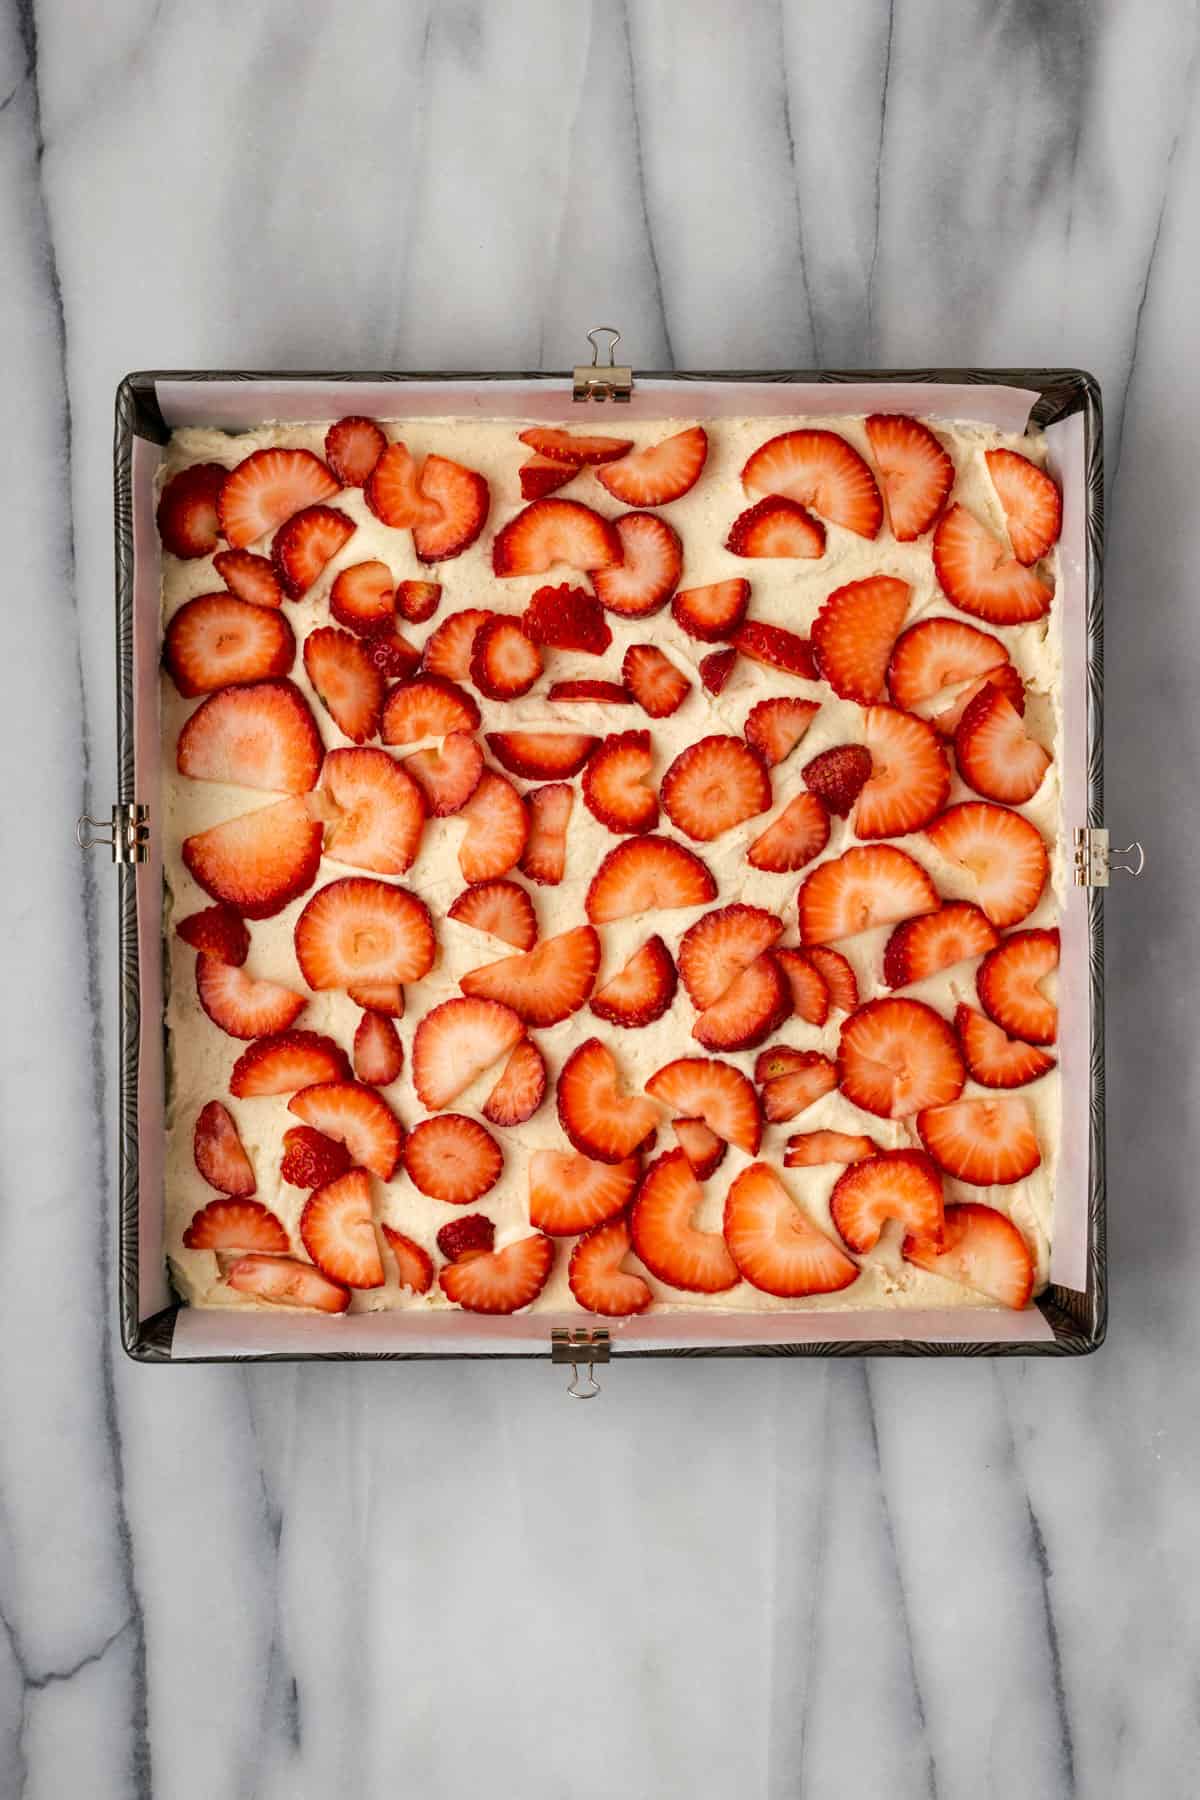 Strawberries spread on top of cake batter in a square baking pan.